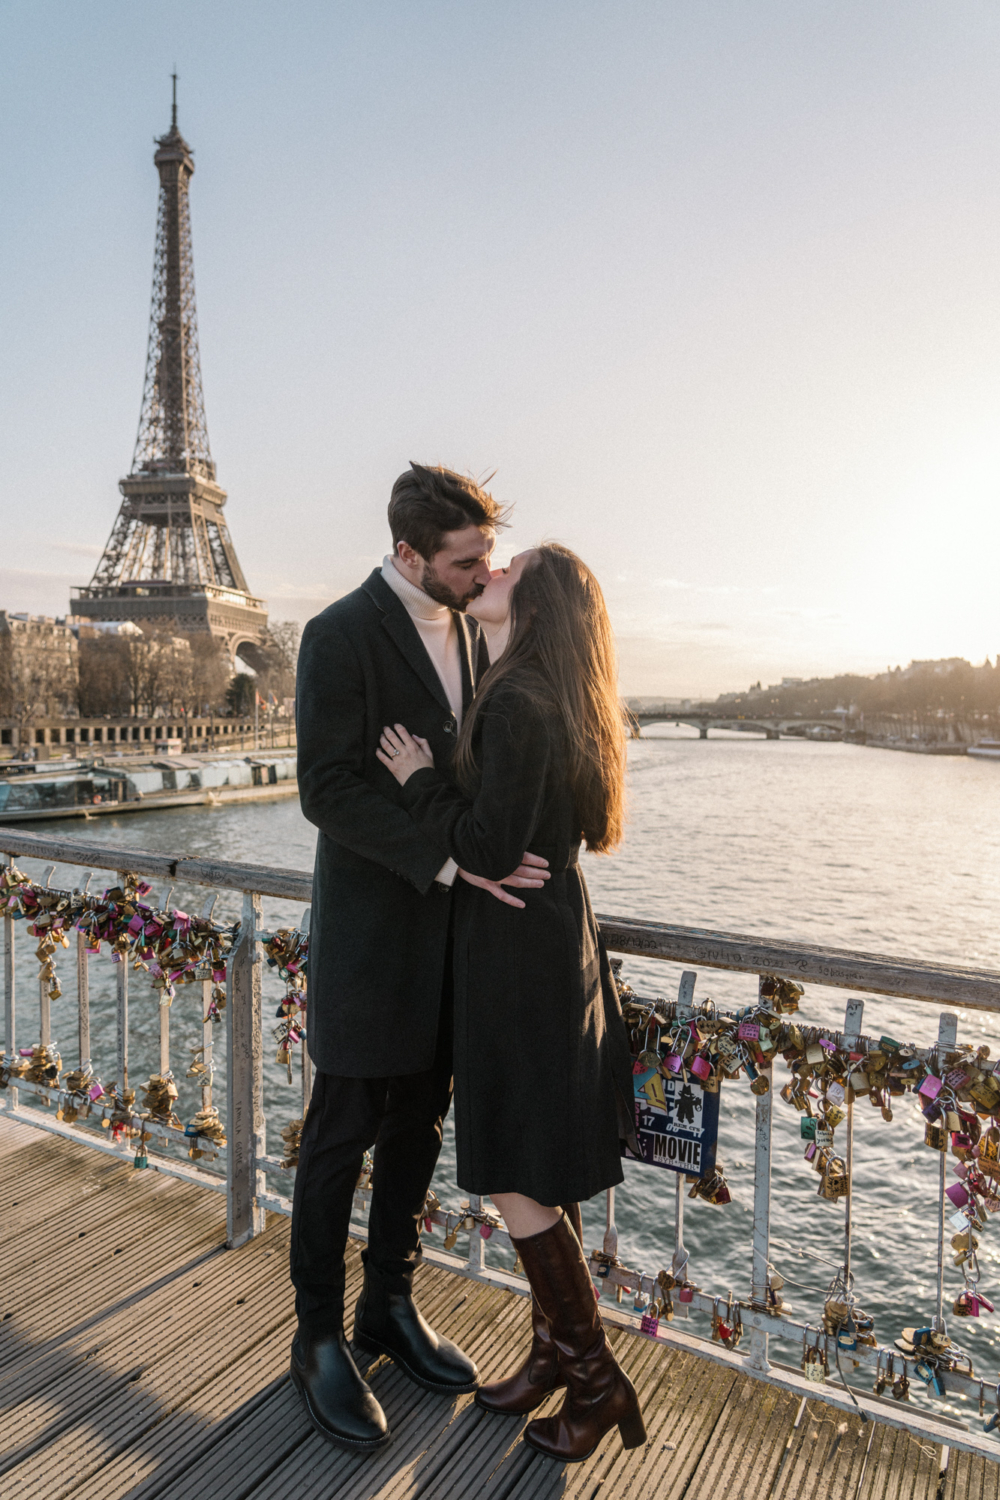 newly engaged couple kiss passionately on bridge with view of eiffel tower